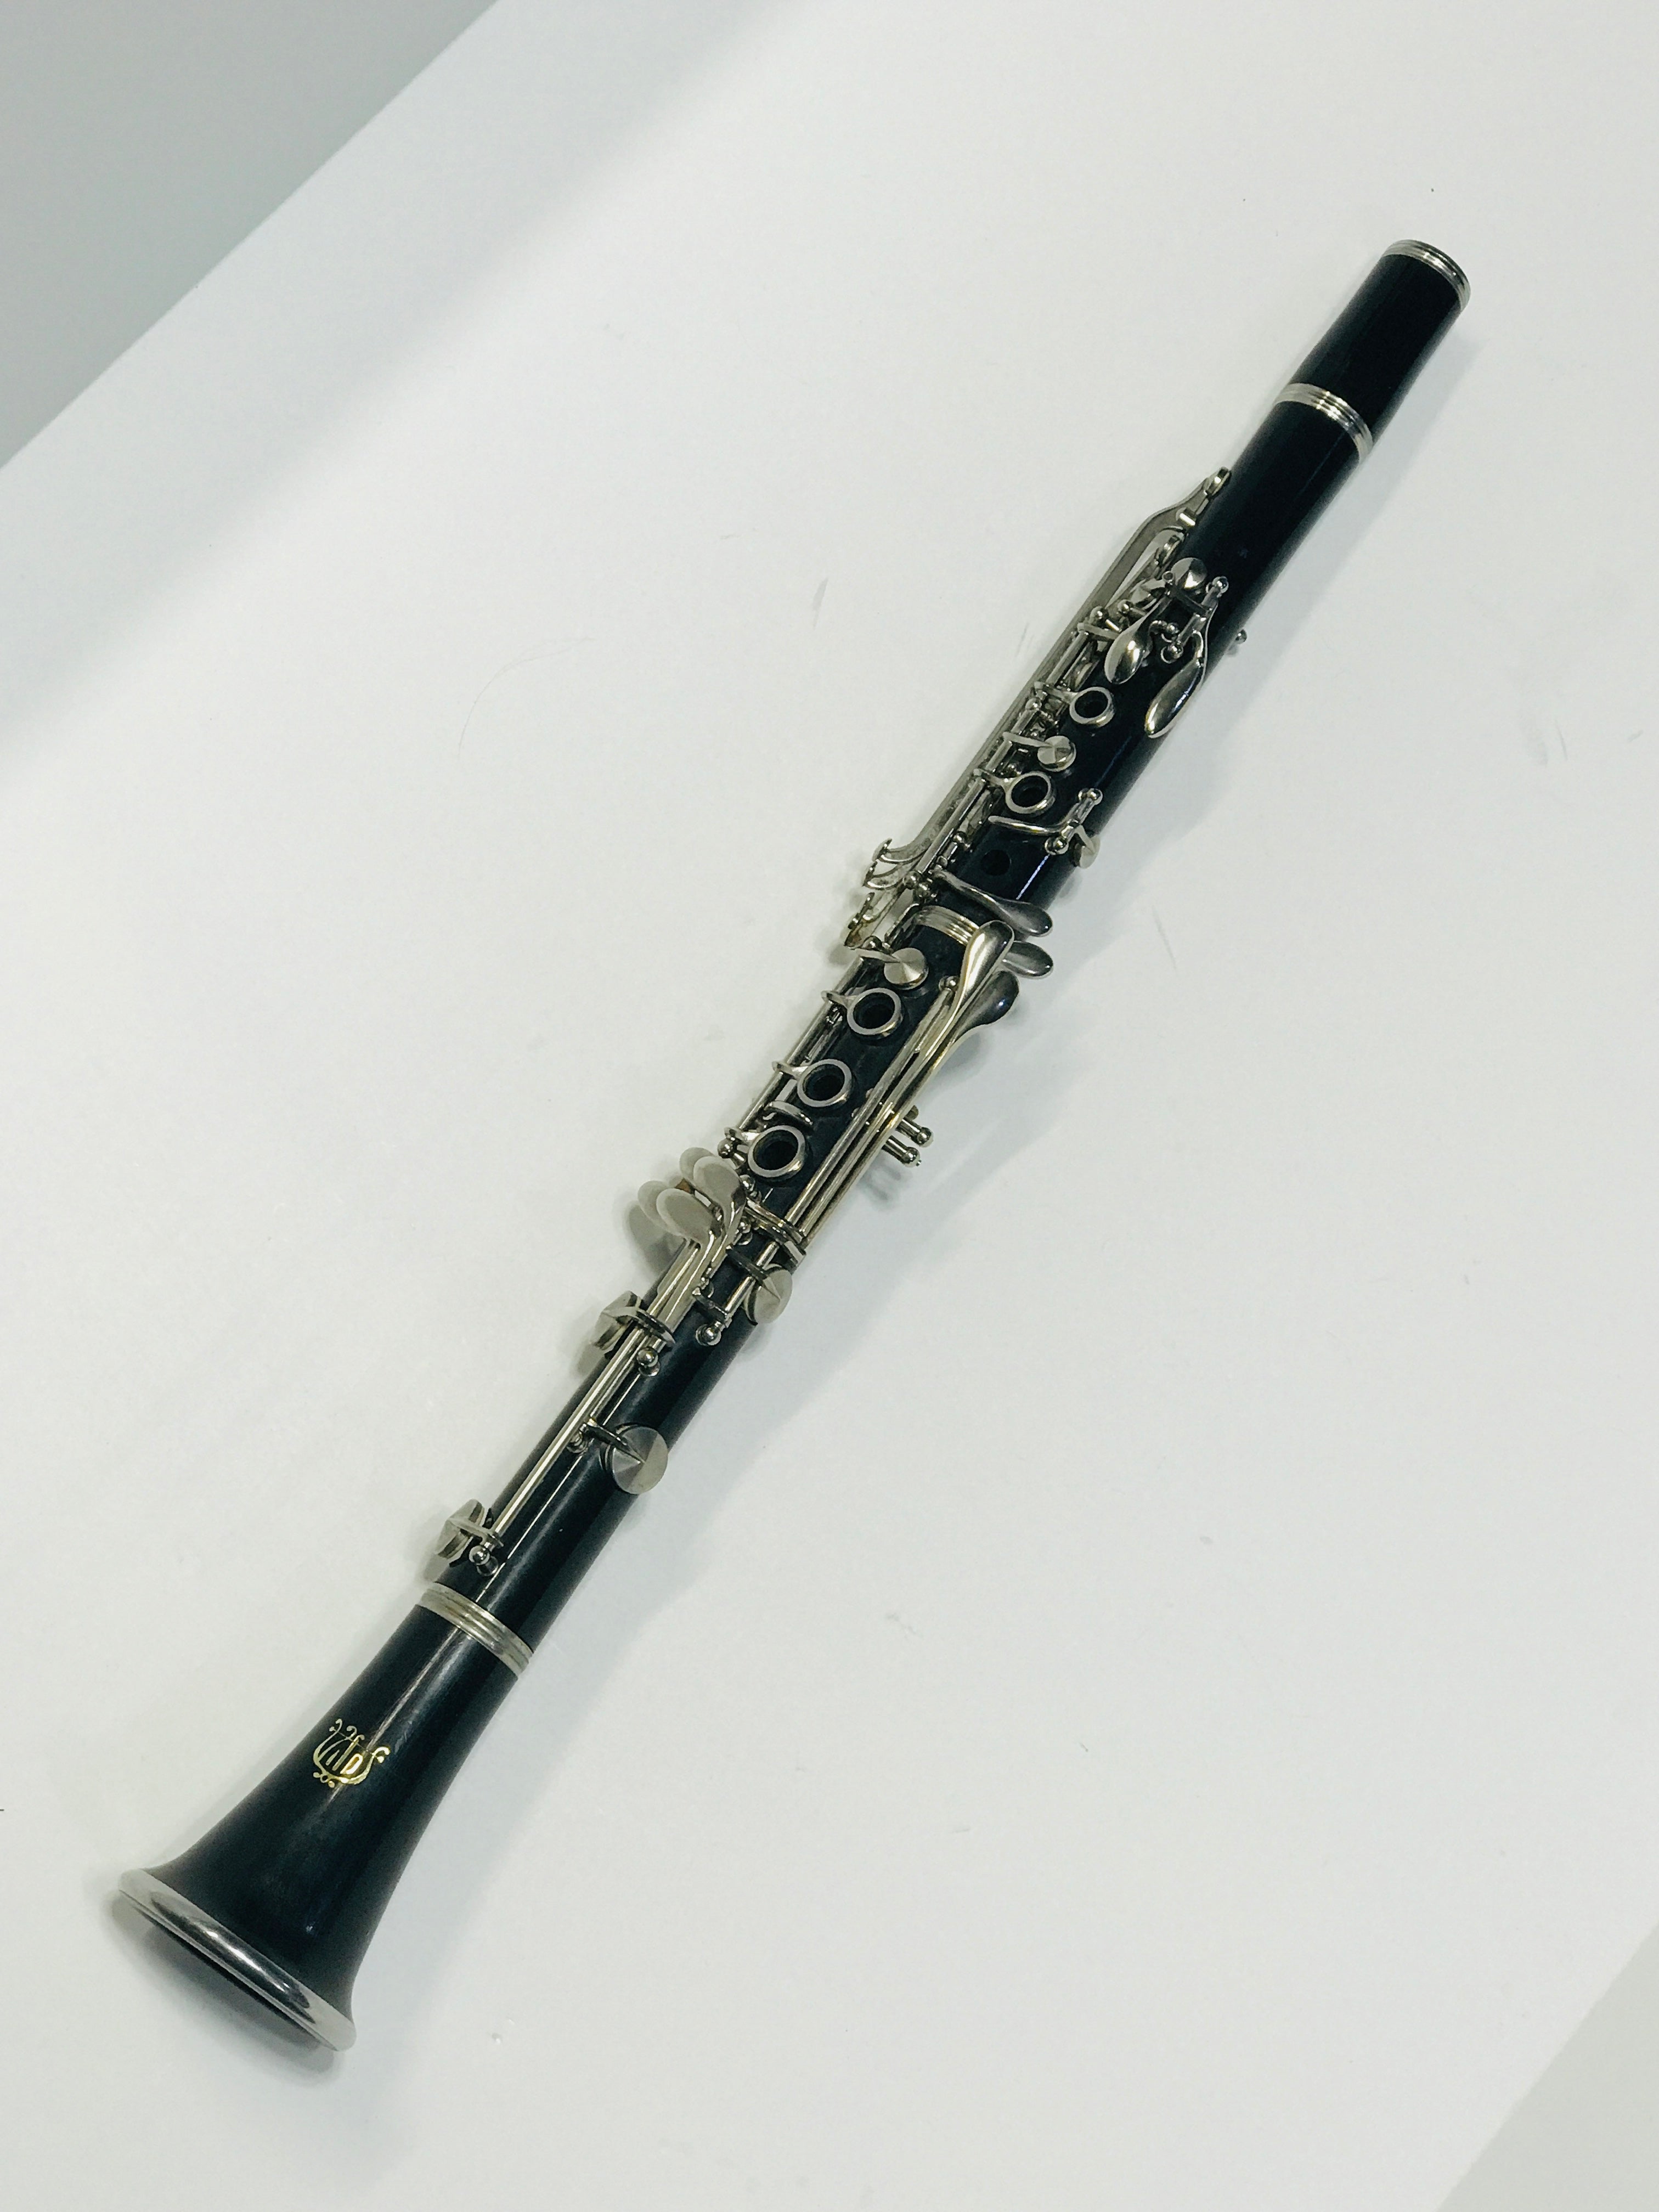 VITO Clarinet Plastic body good pads recently serviced plays well USED